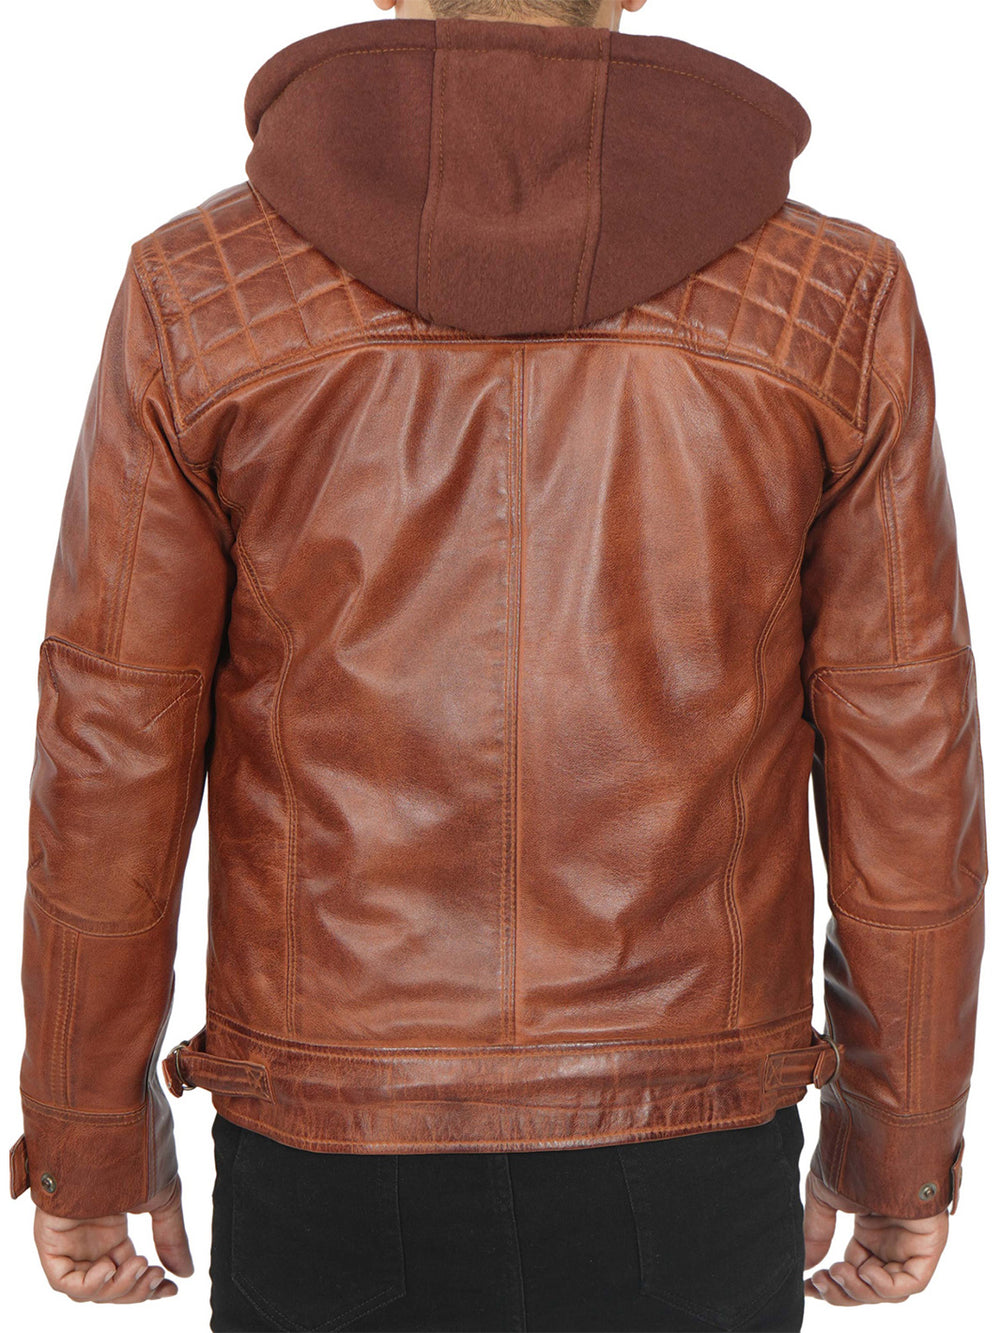 Mens Brown Leather Jacket with hood